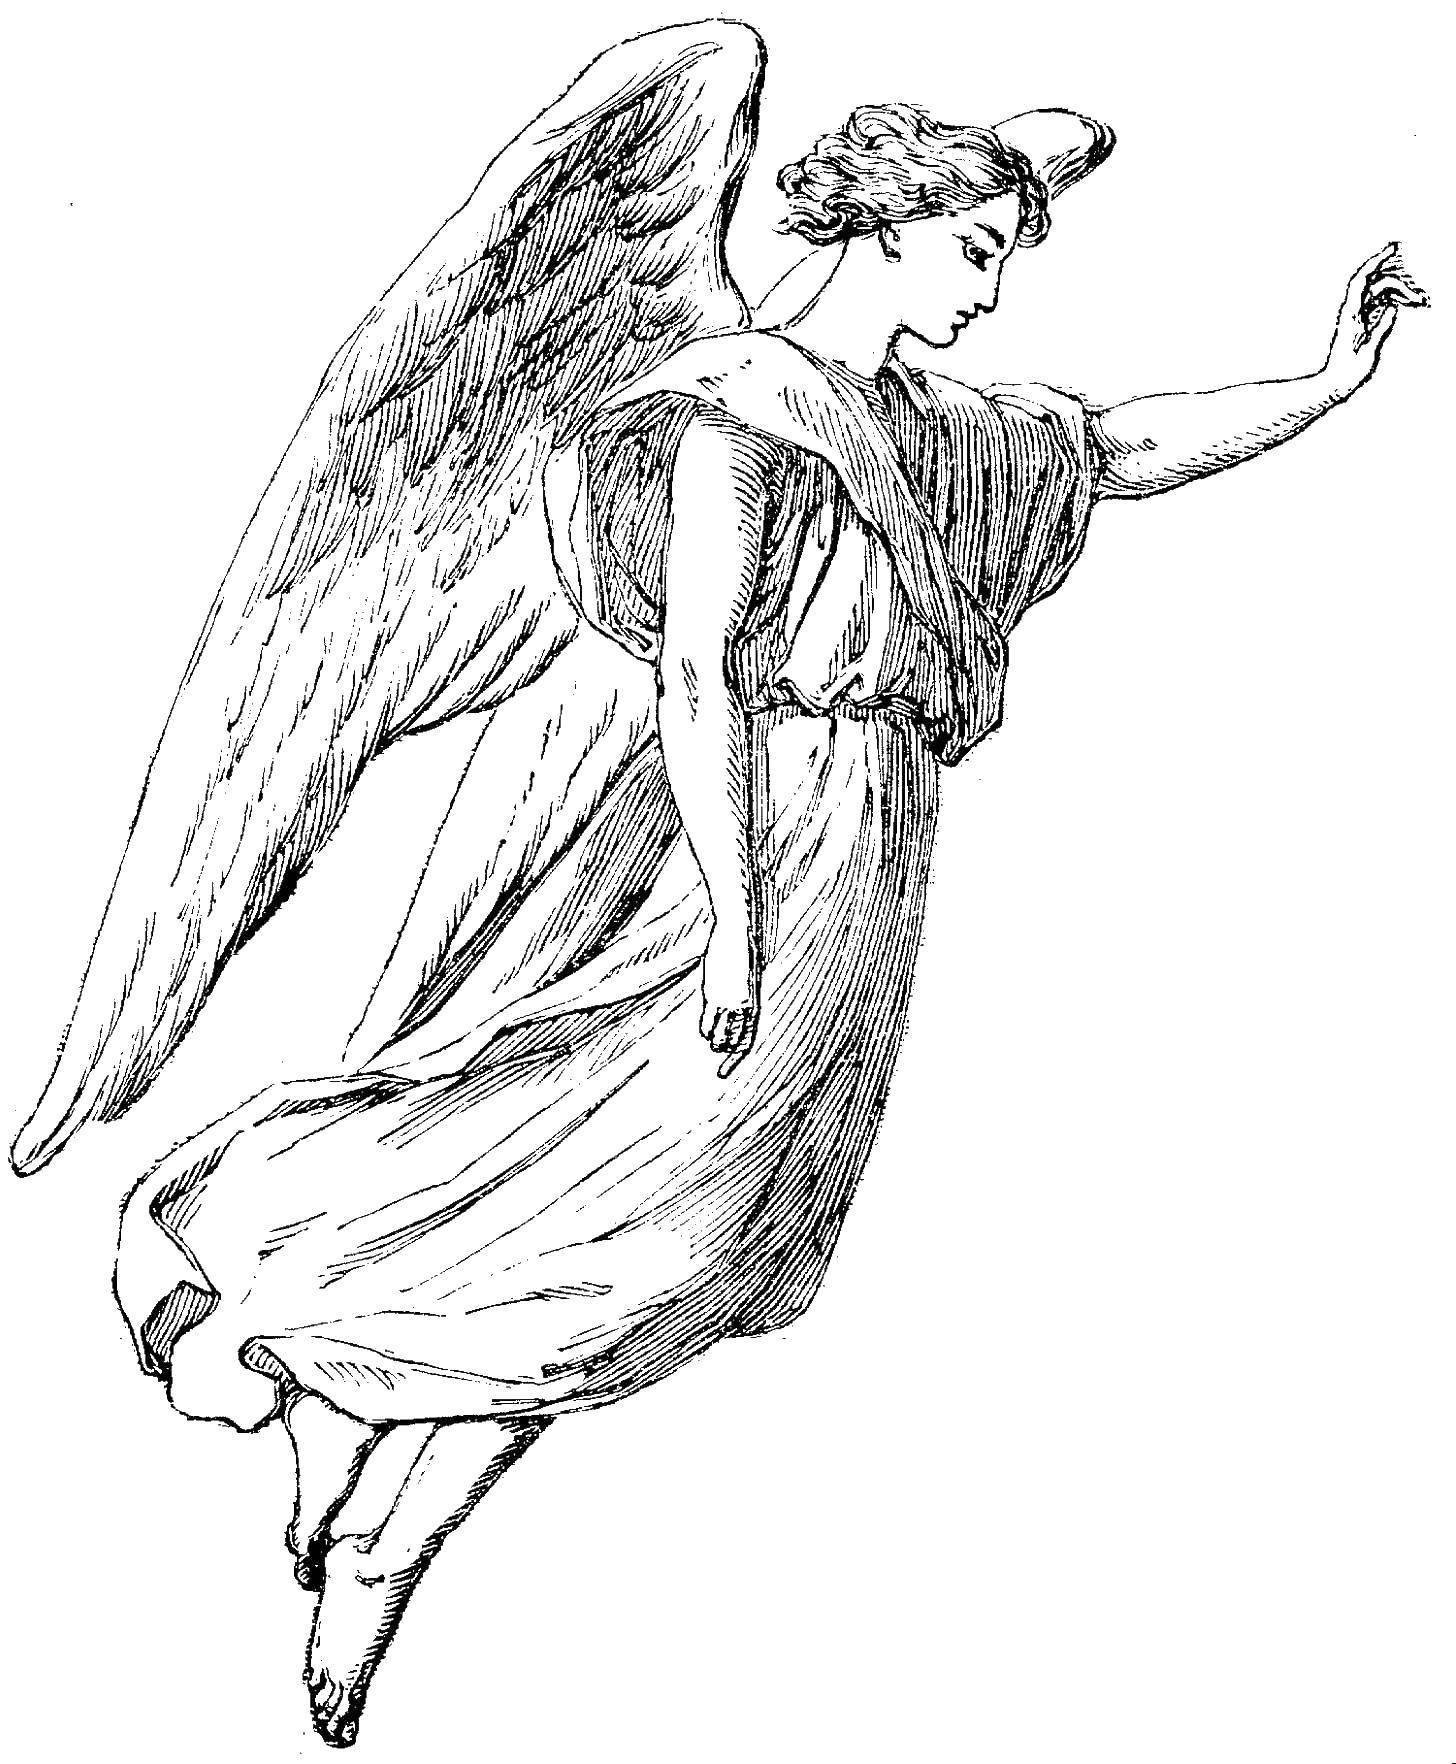 Coloring Angel. Category angels. Tags:  angel .